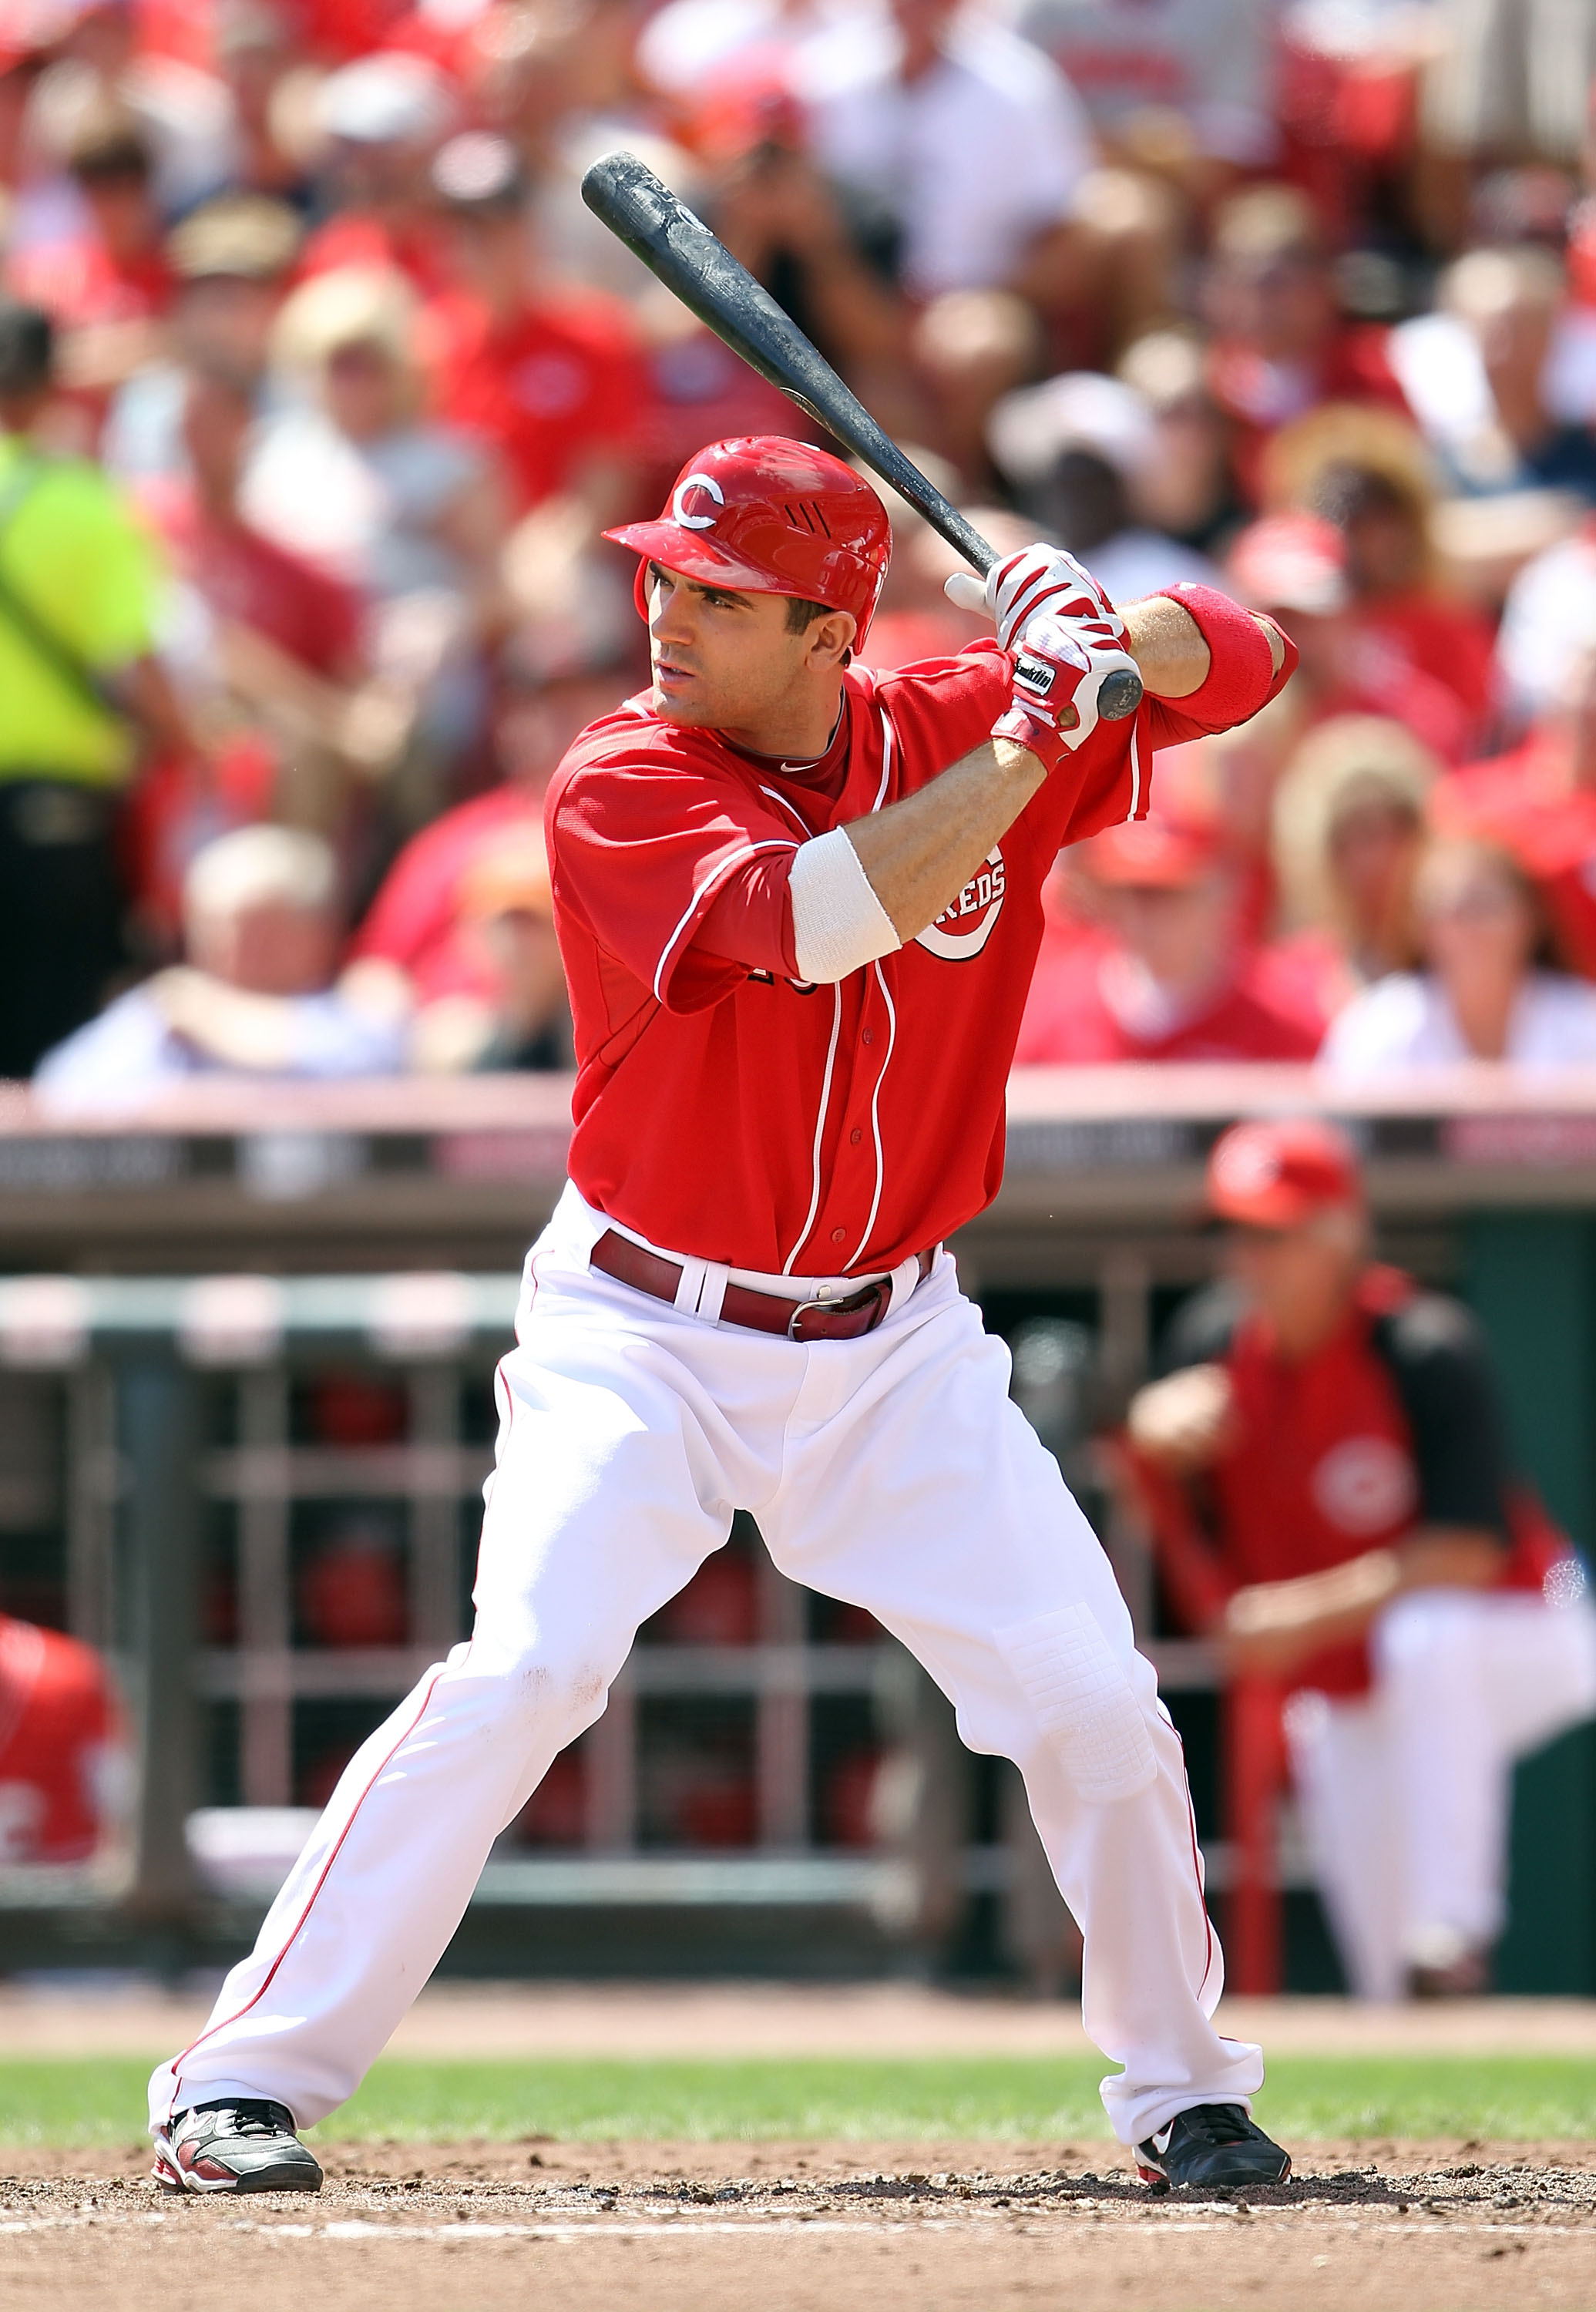 2010 N.L MVP Joey Votto: 10 Reasons Why He Could Win Another One